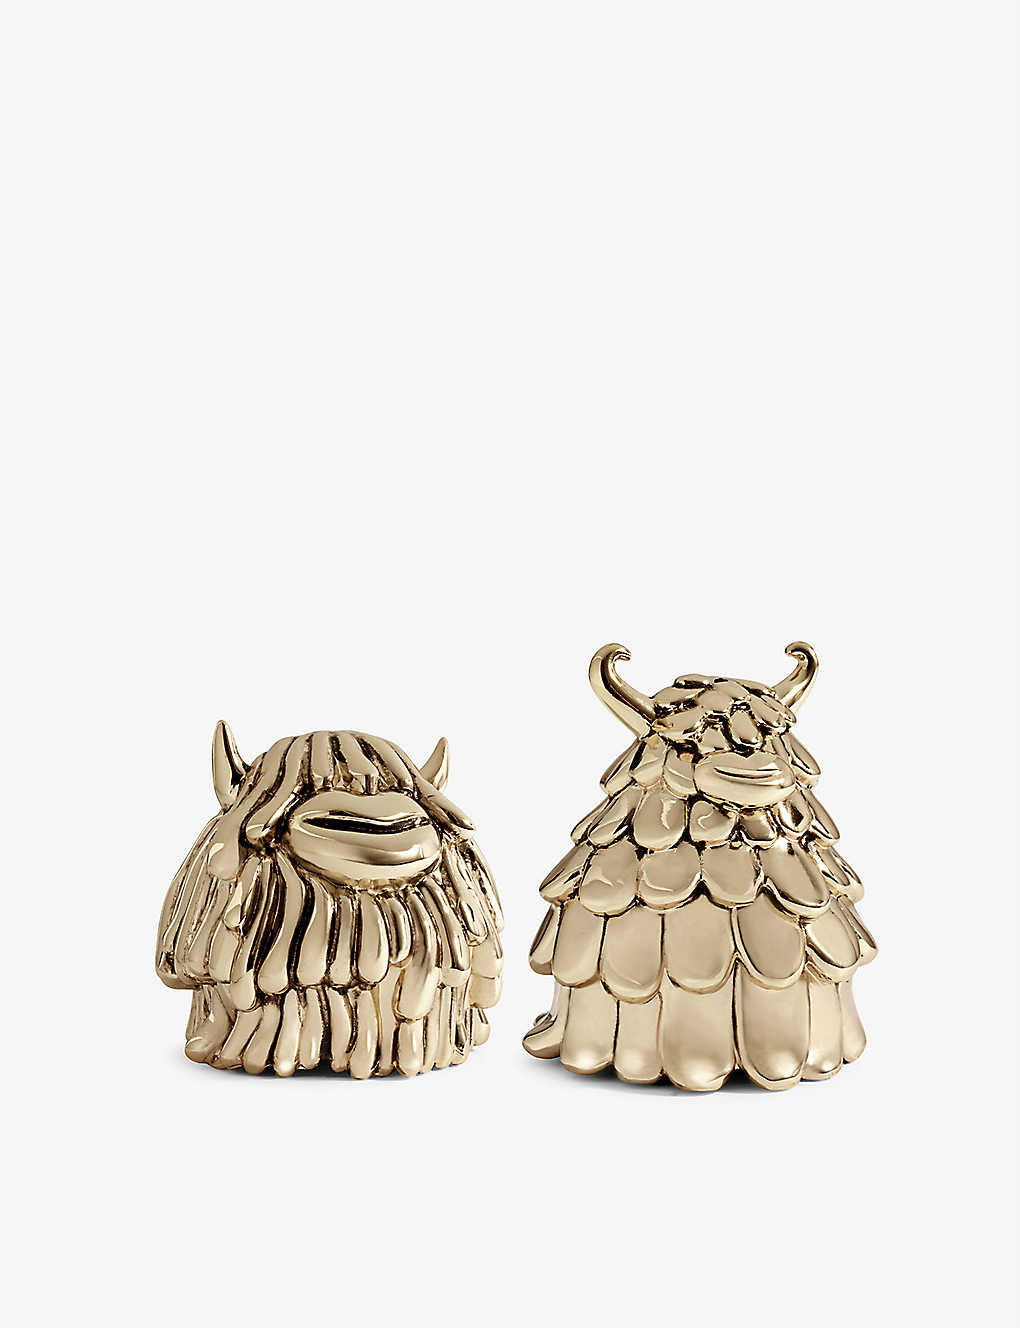 L'OBJET ニキ&サイモン 24カラット 金メッキ黄銅 塩&こしょう入れ Niki and Simon 24ct gold-plated brass salt and pepper shakers